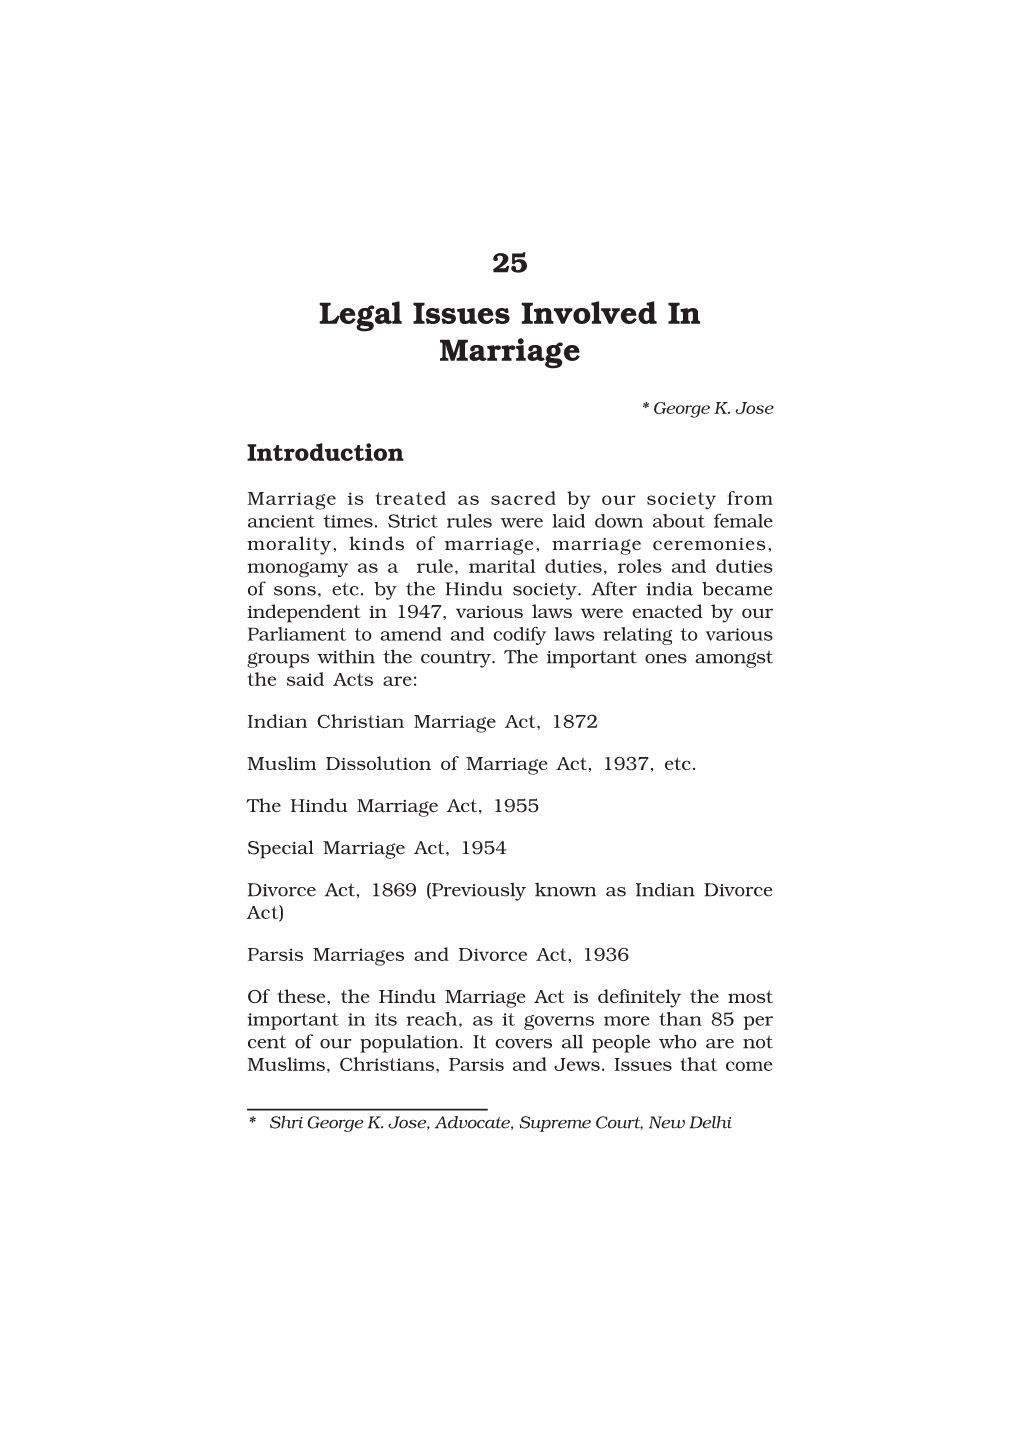 Legal Issues Involved in Marriage 217 25 Legal Issues Involved in Marriage